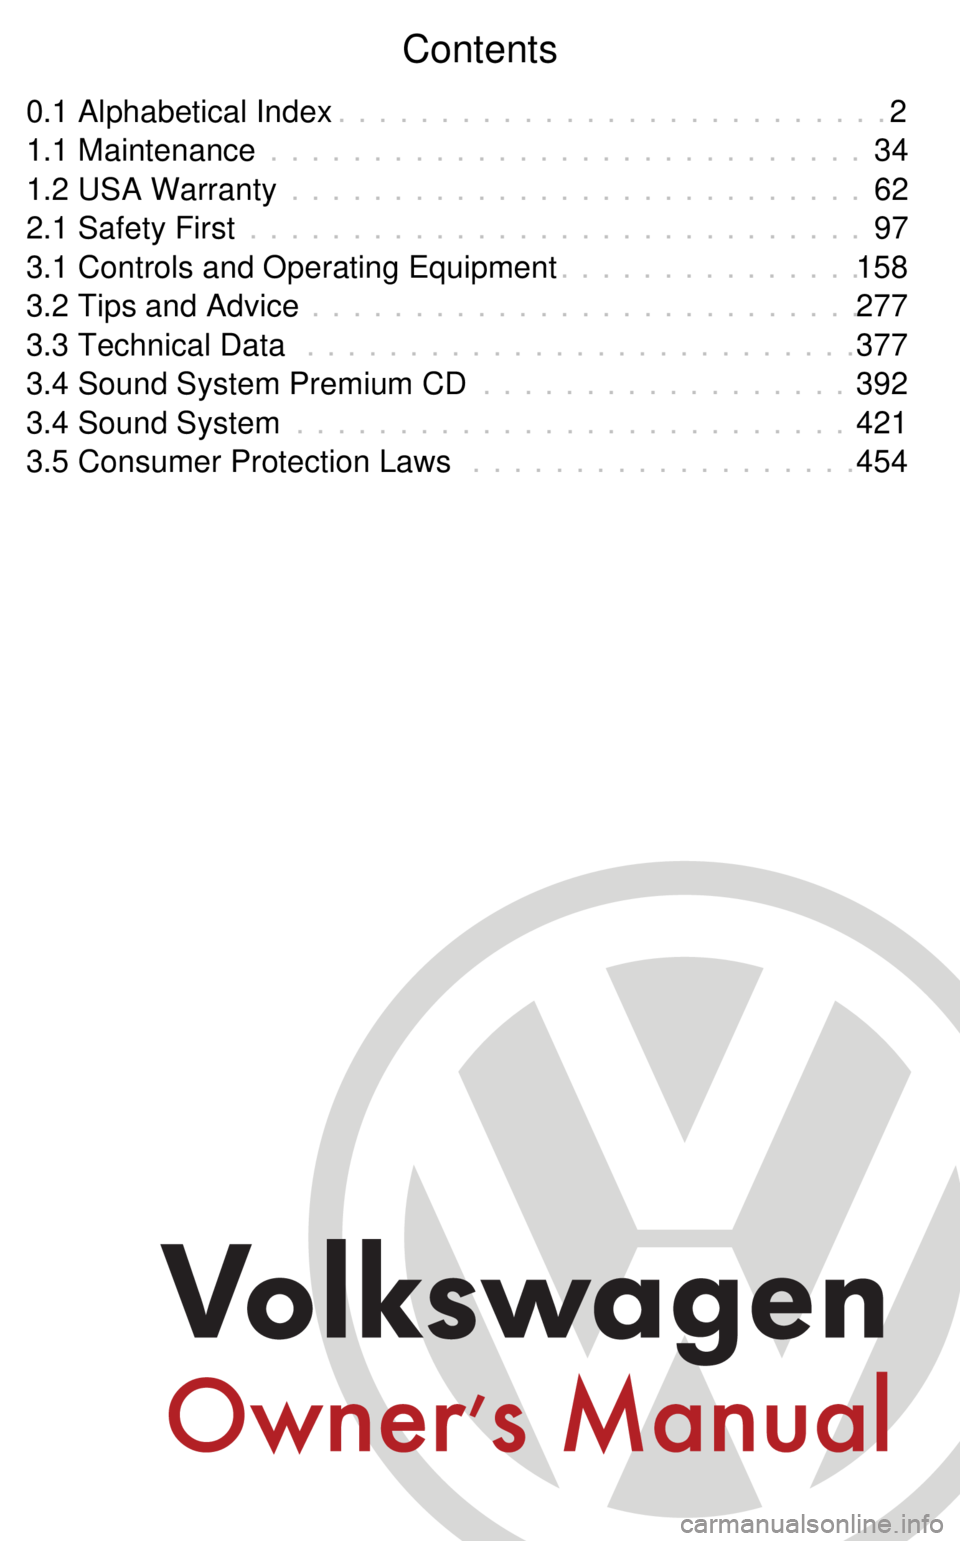 VOLKSWAGEN GOLF 2003  Owners Manual Contents
0.1 Alphabetical Index 2
. . . . . . . . . . . . . . . . . . . . . . . . . . .
1.1 Maintenance 34
. . . . . . . . . . . . . . . . . . . . . . . . . . . . .
1.2 USA Warranty 62
. . . . . . . .